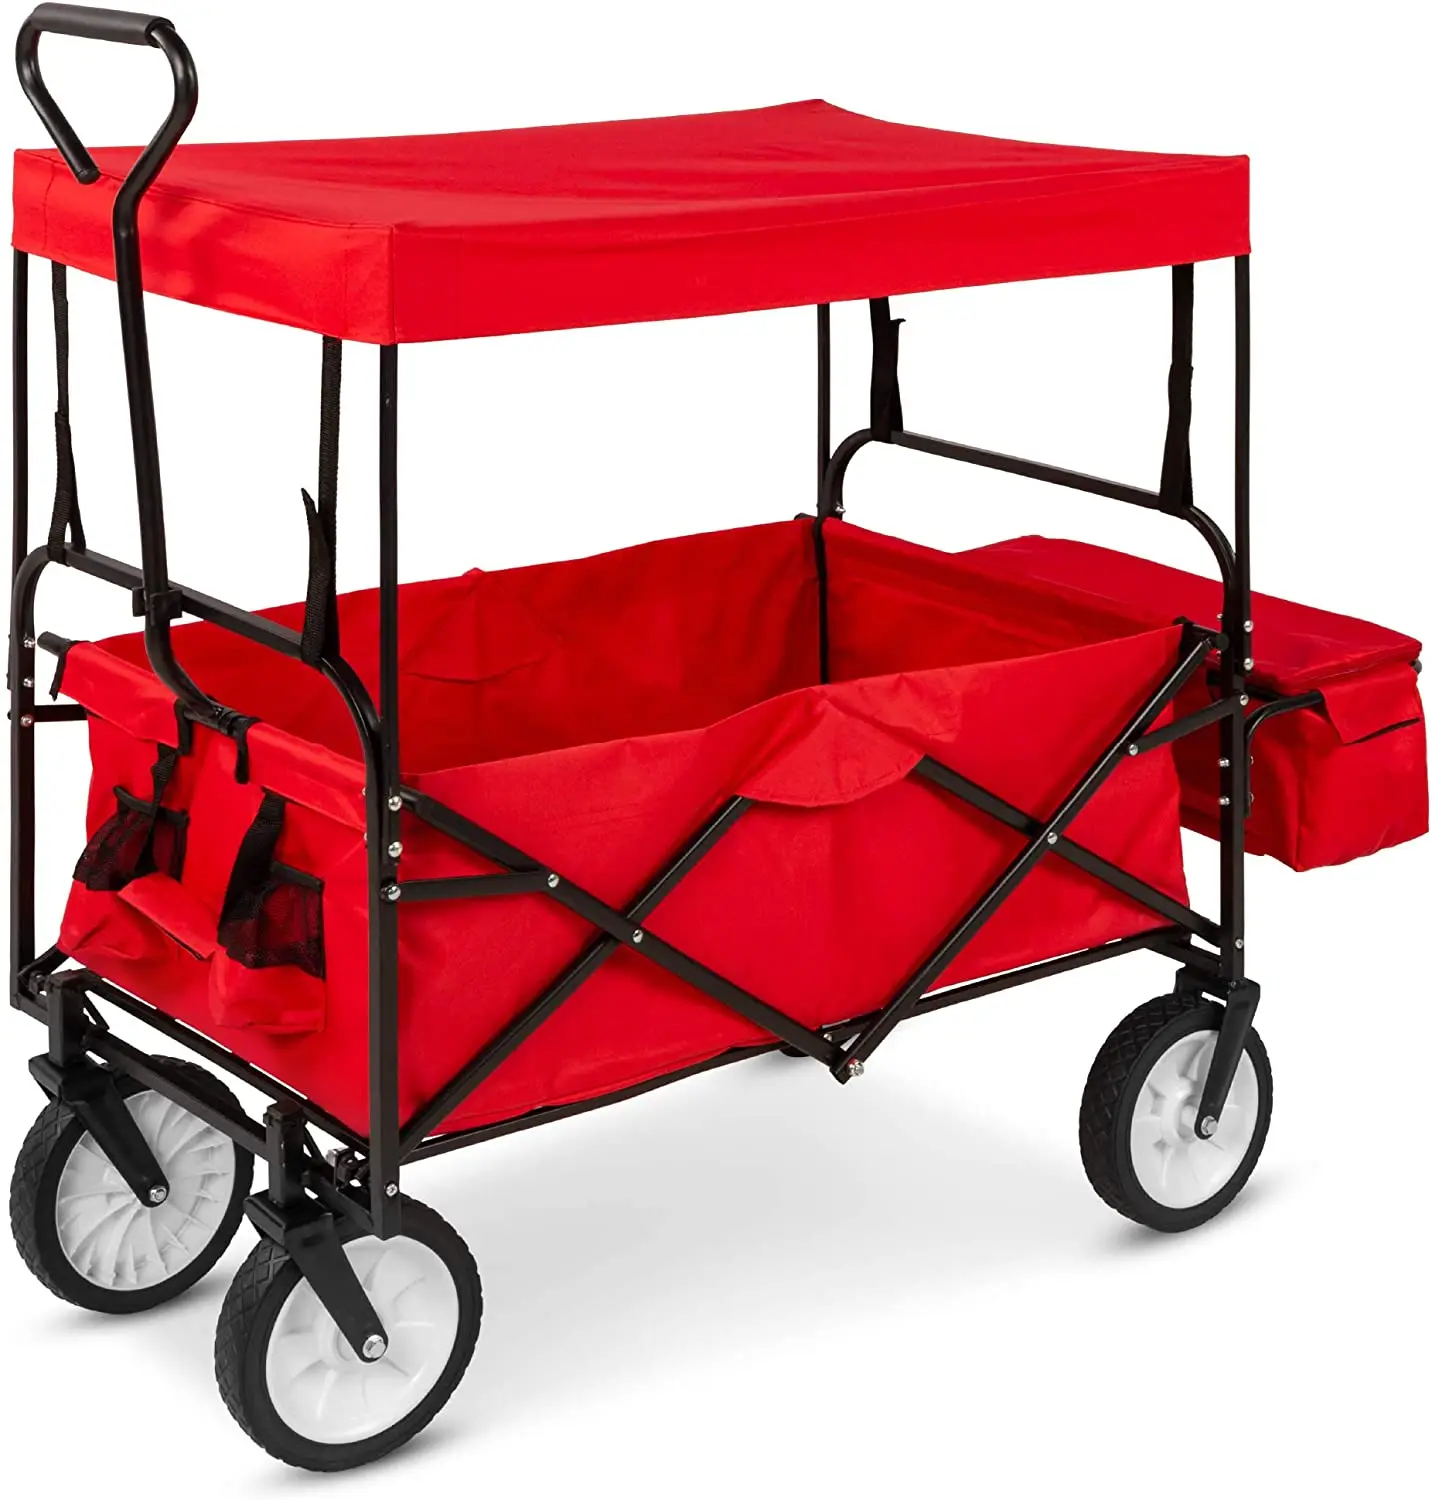 HTTMT P/N: ET-TOOL038-BLUE Blue Multifunction Folding Wagon Cart Outdoor Portable Wheels for Utility,Camping,Grocery,Shopping,Kid Carry,Picnic,Beach,Garden 